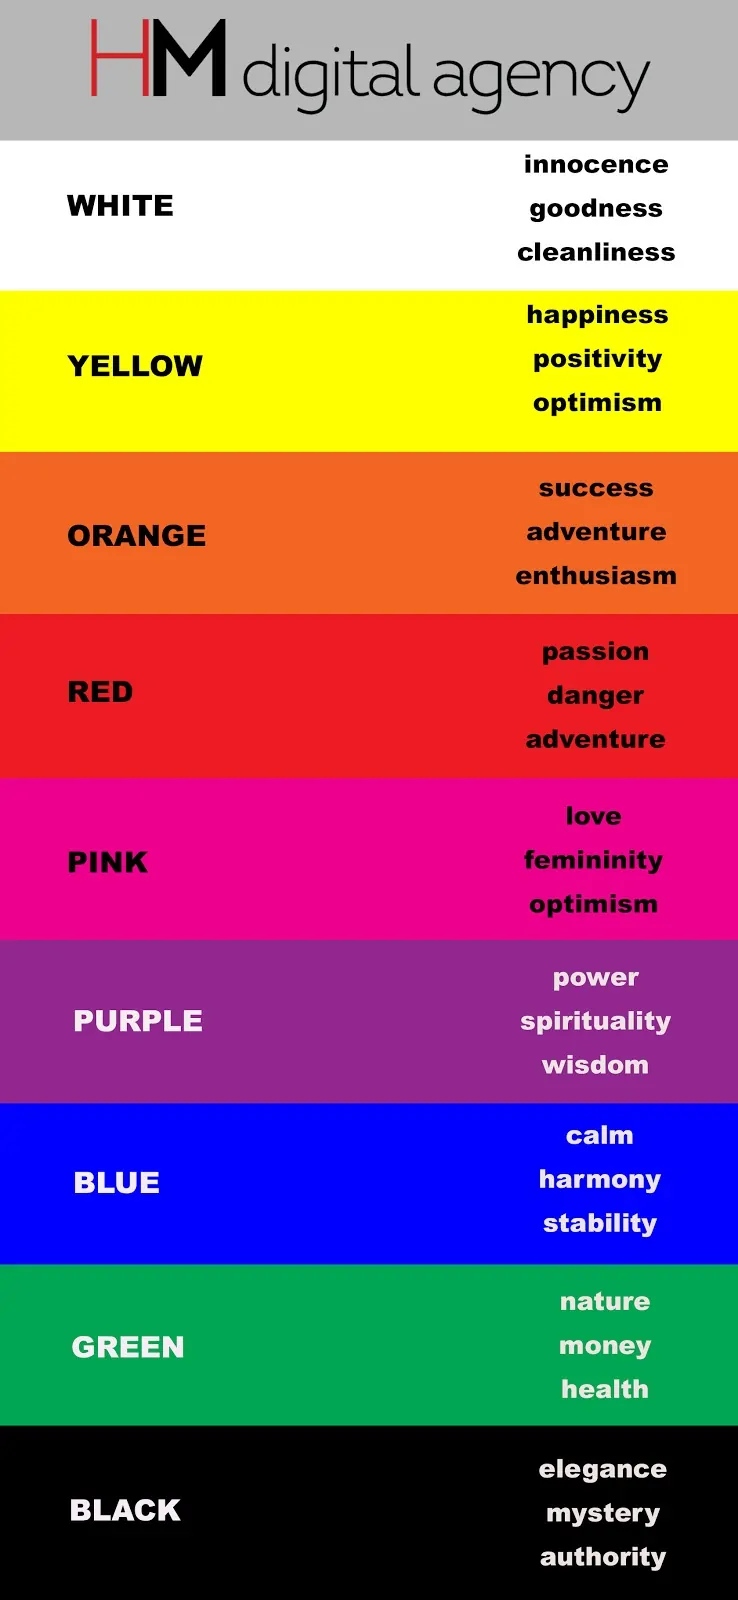 Psychology of colors